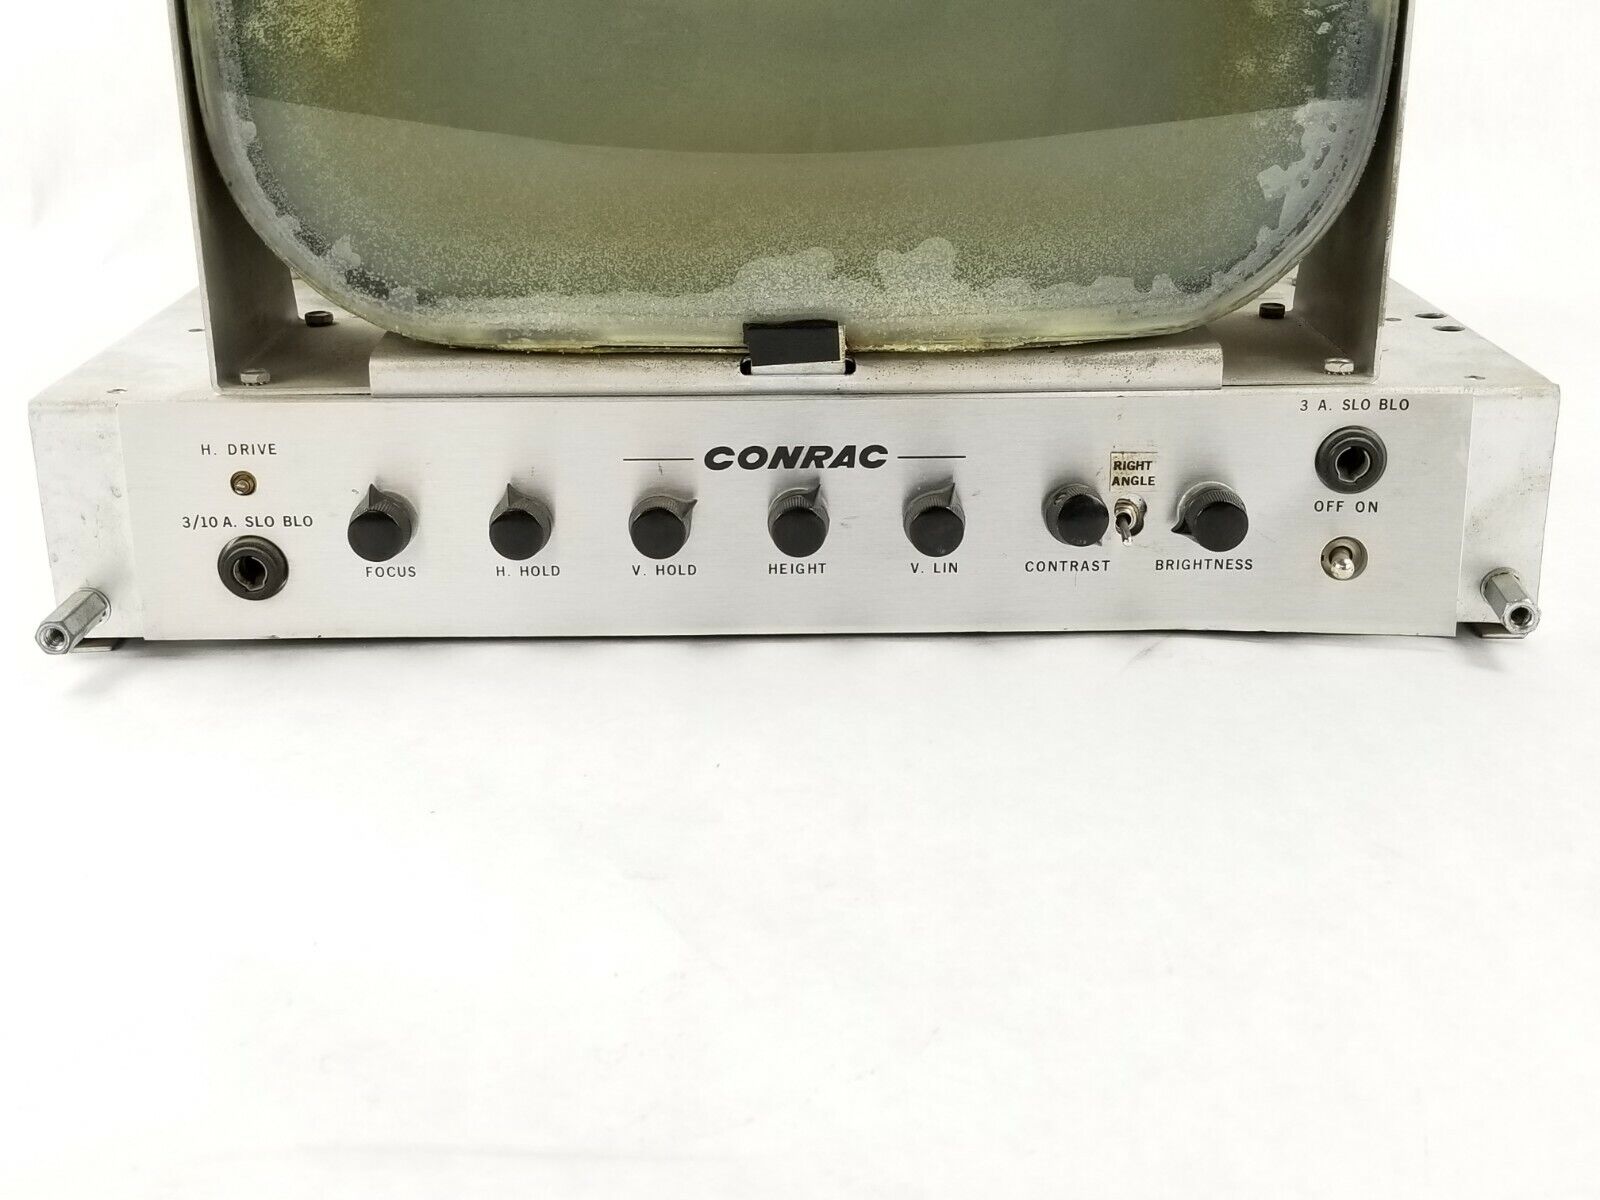 CONRAC Type 520114-004 Model # CAF 14 Untested-Parts or Repair